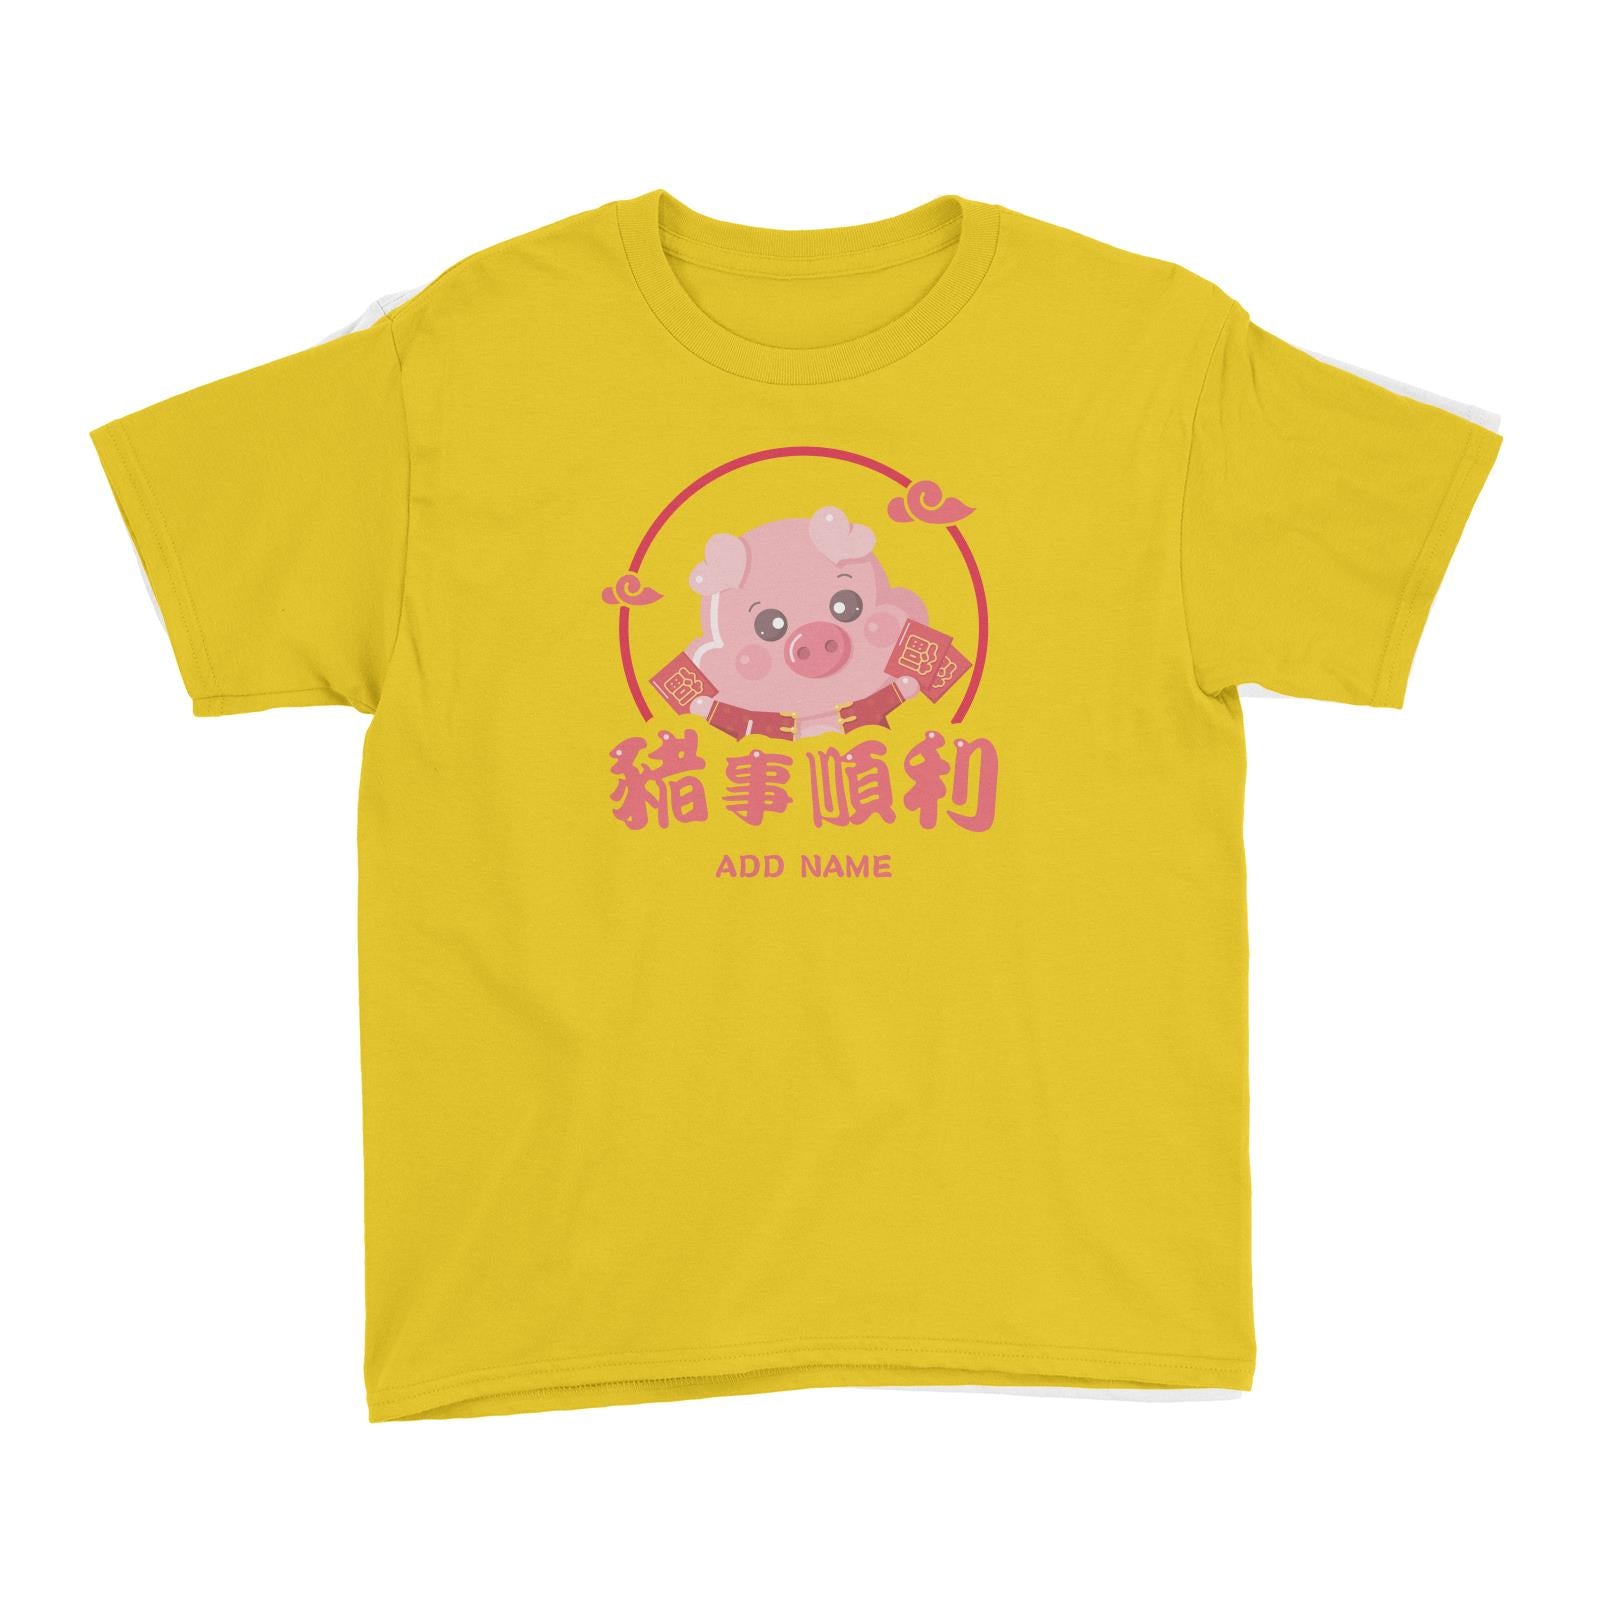 Chinese New Year Cute Pig Emblem Boy With Addname Kid's T-Shirt